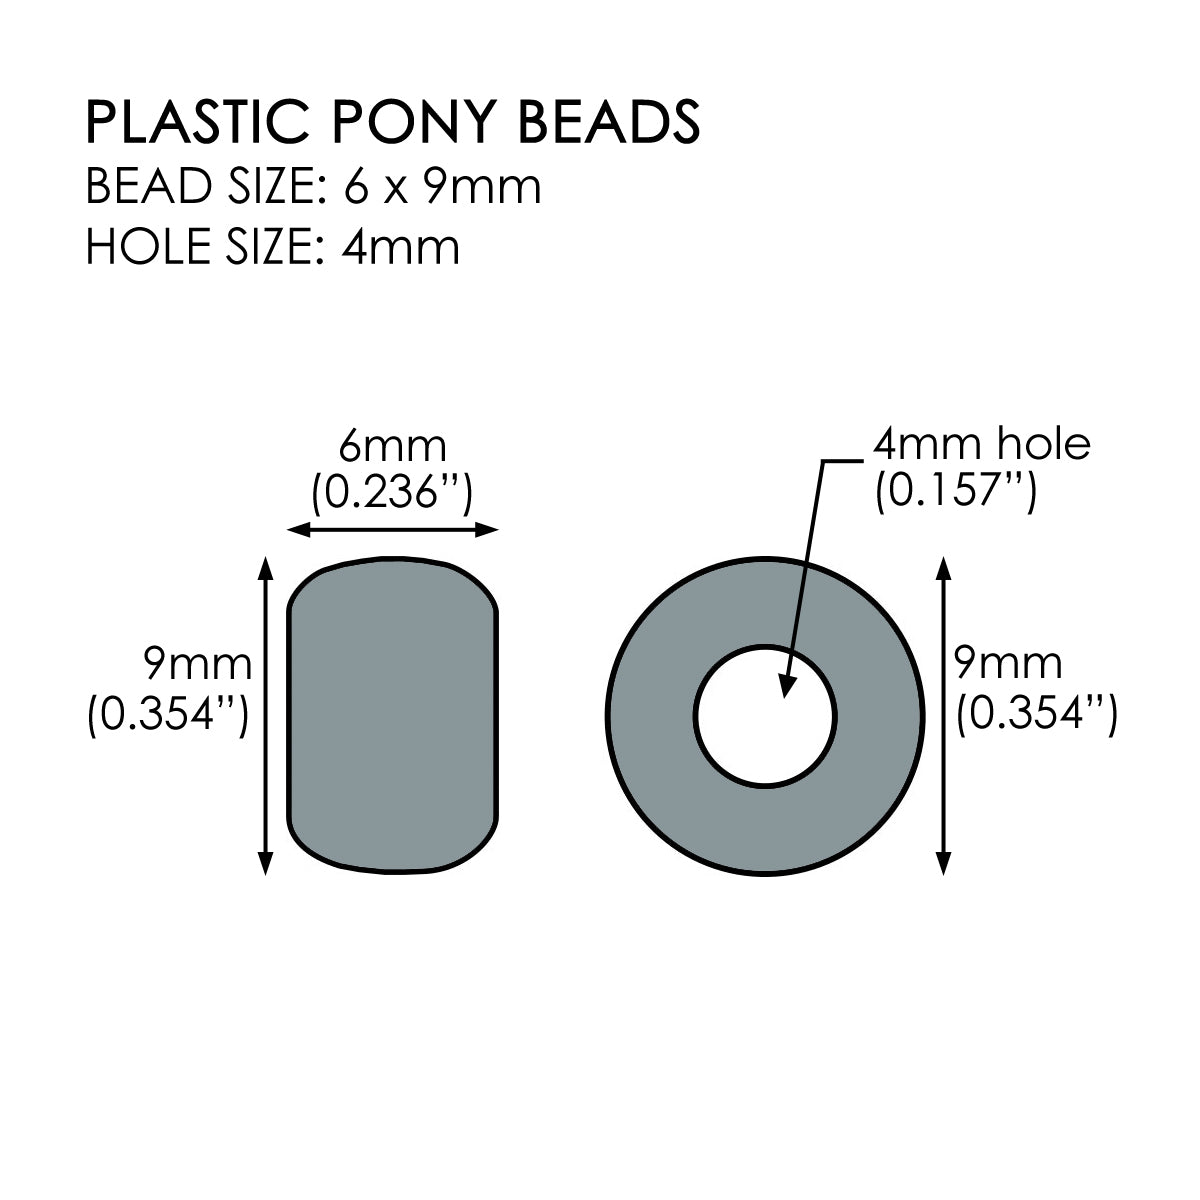 Colorations® Fun Shapes Pony Beads 1 lb